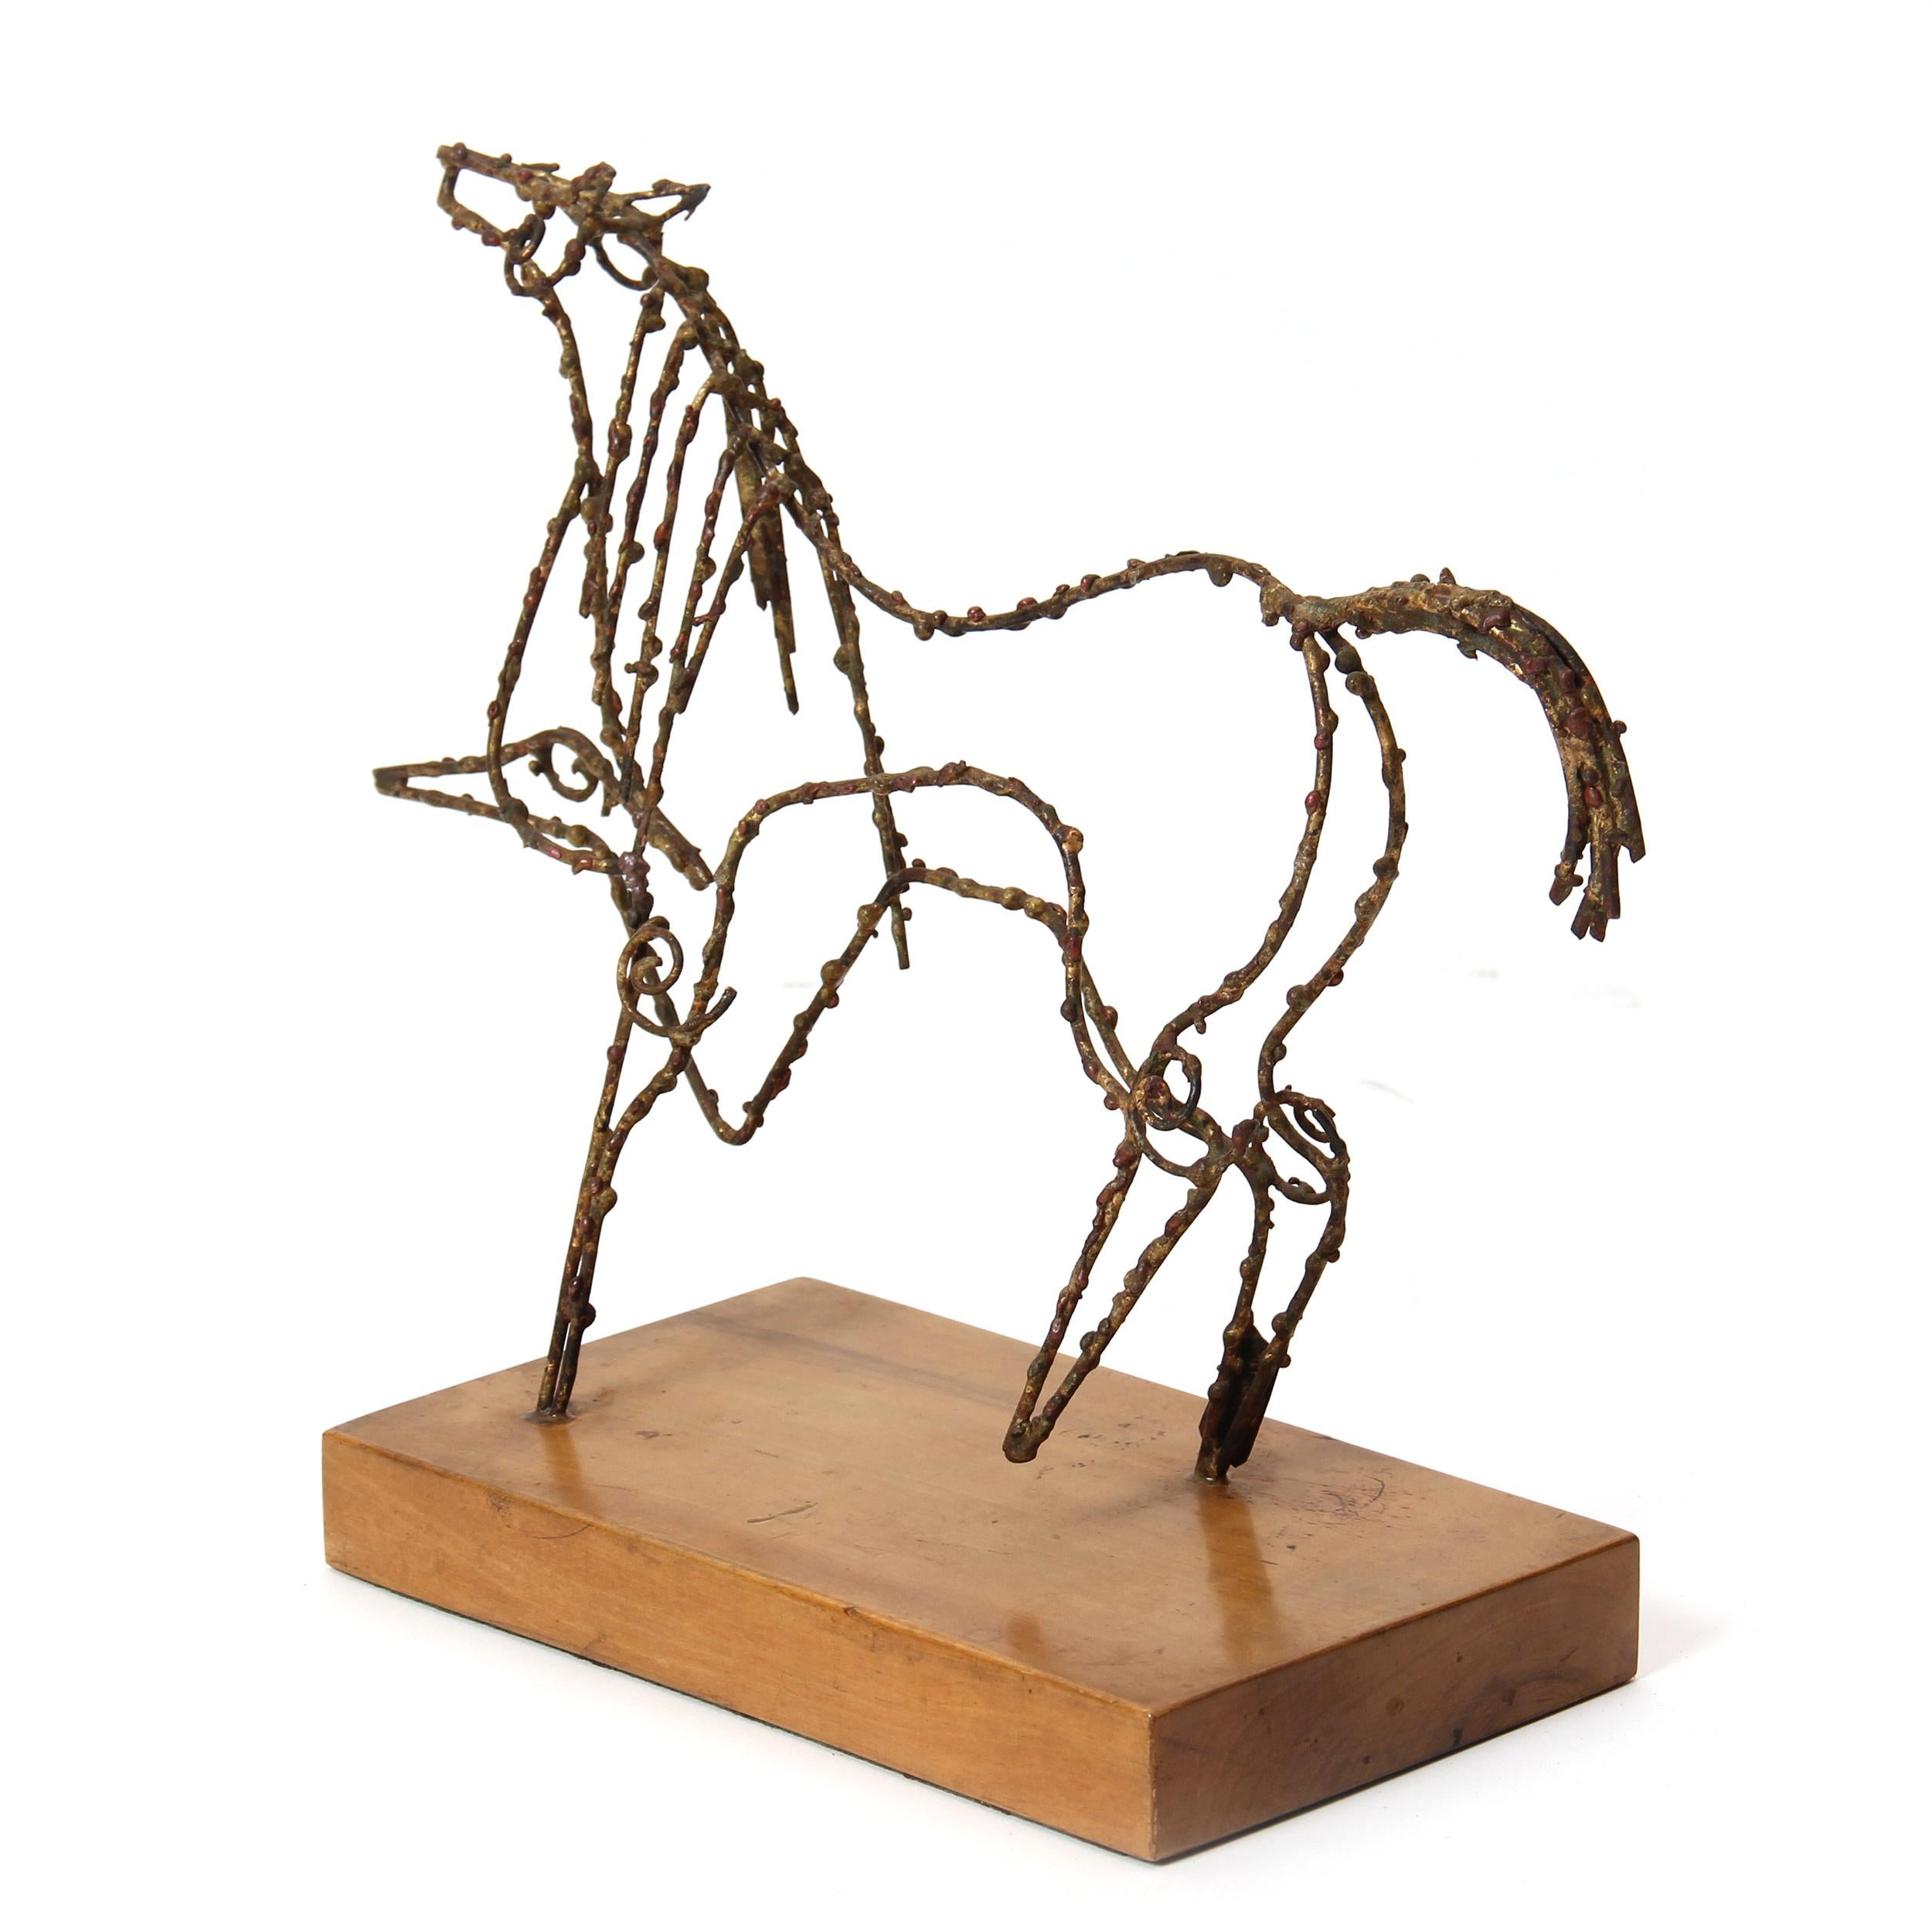 A bronze wire sculpture of a prancing horse on a wooden base.